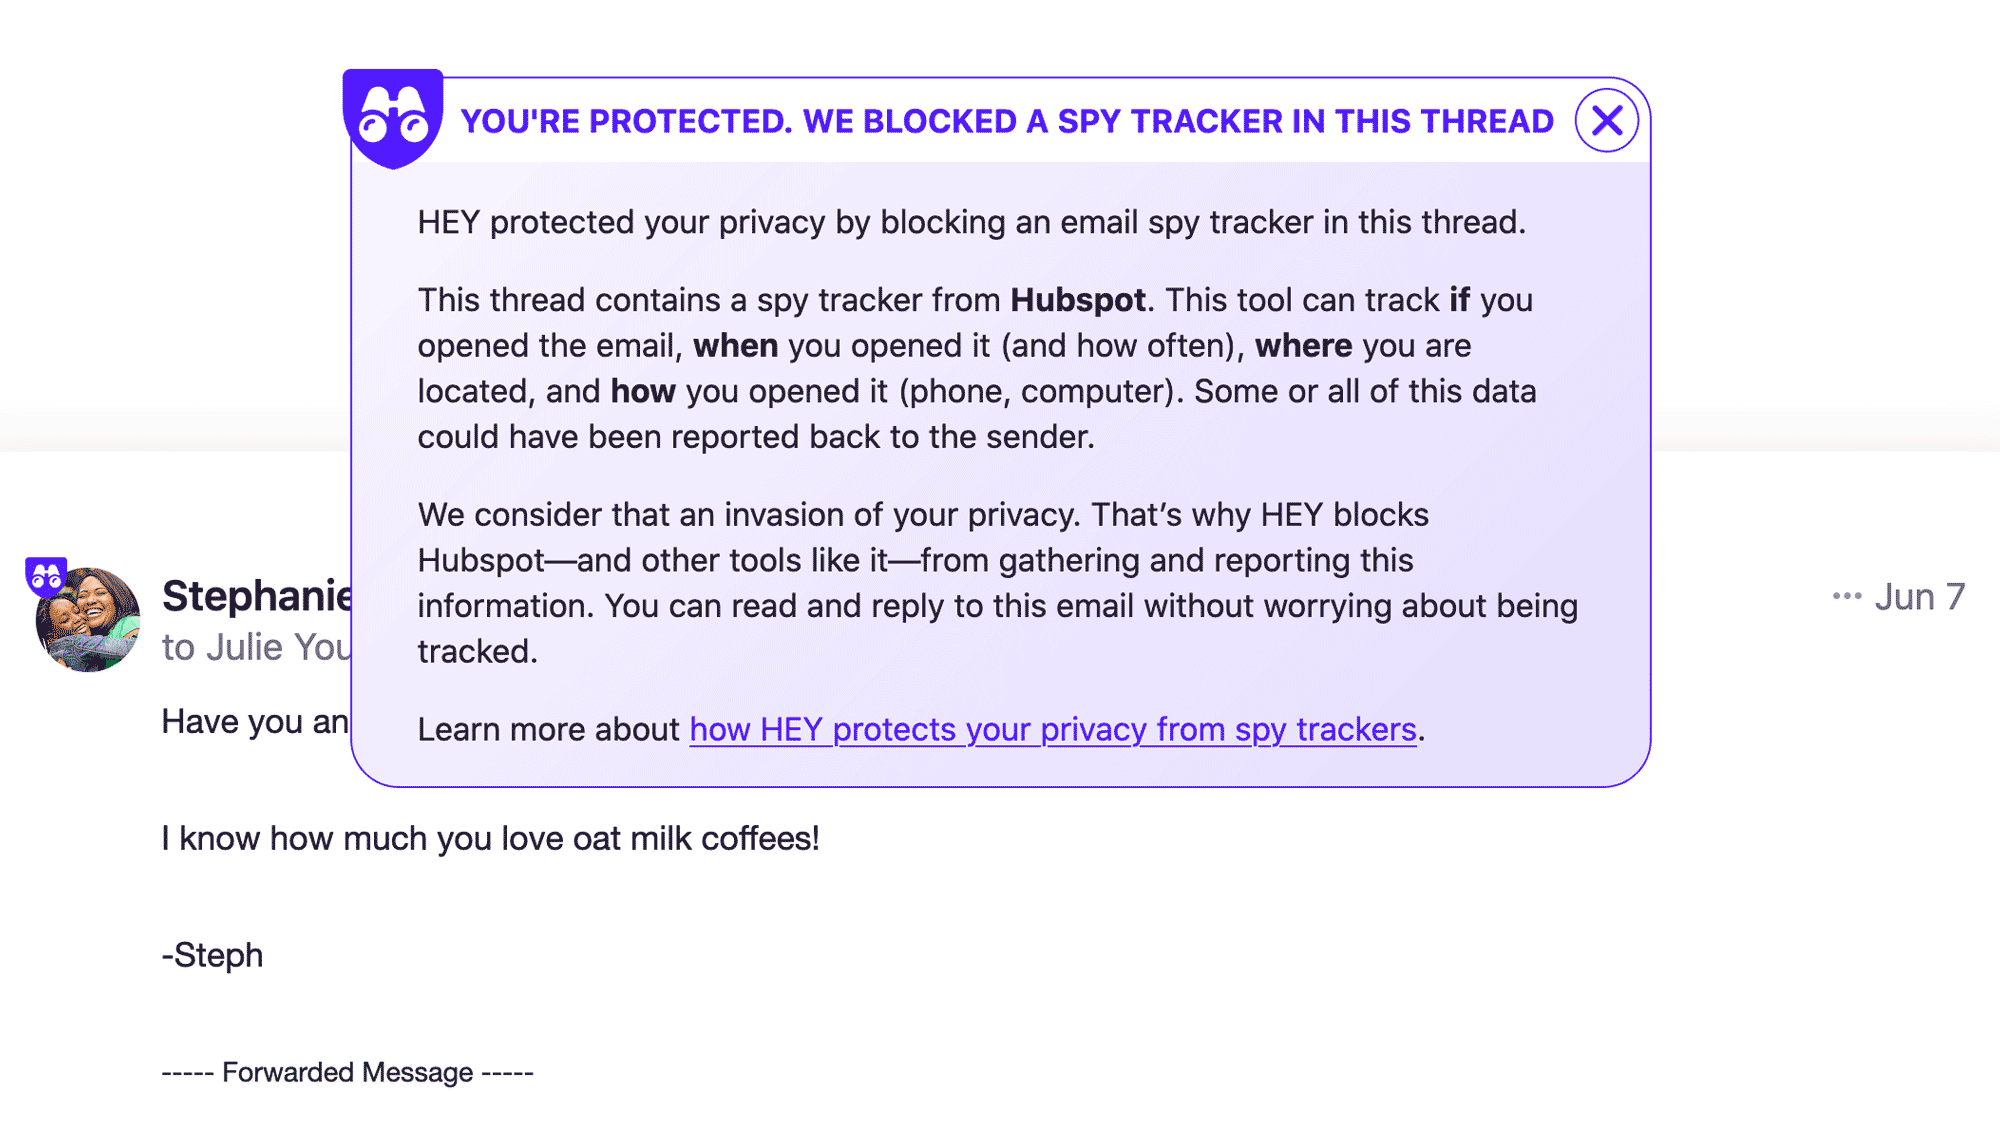 screenshot of privacy protection from email trackers in HEY email client. Headline states: "You're protected. We blocked a spy tracker in this thread."